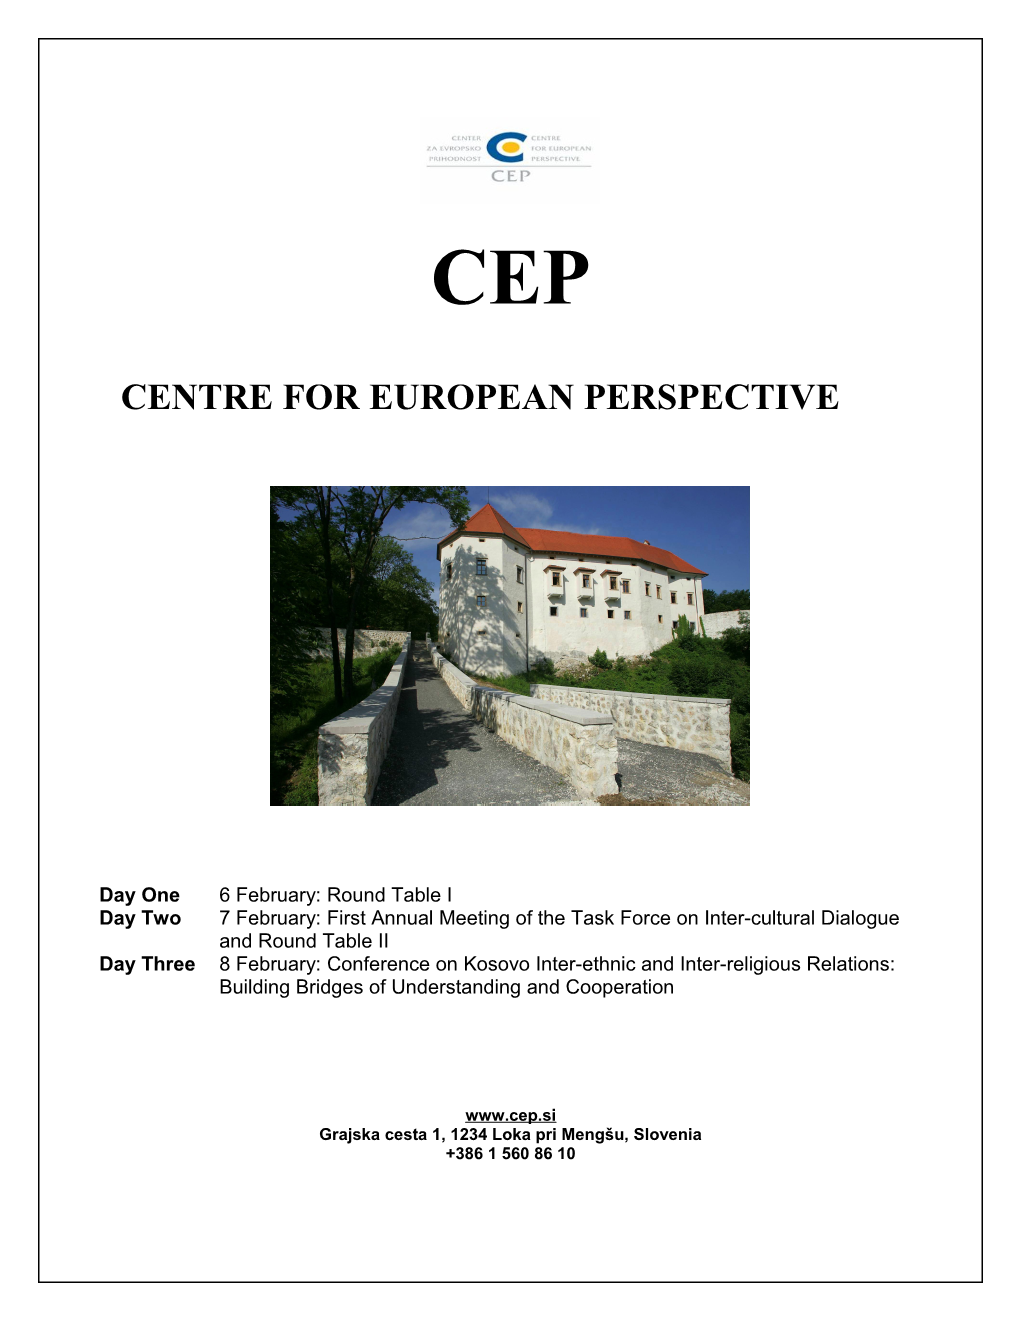 Information About the Center for European Perspective